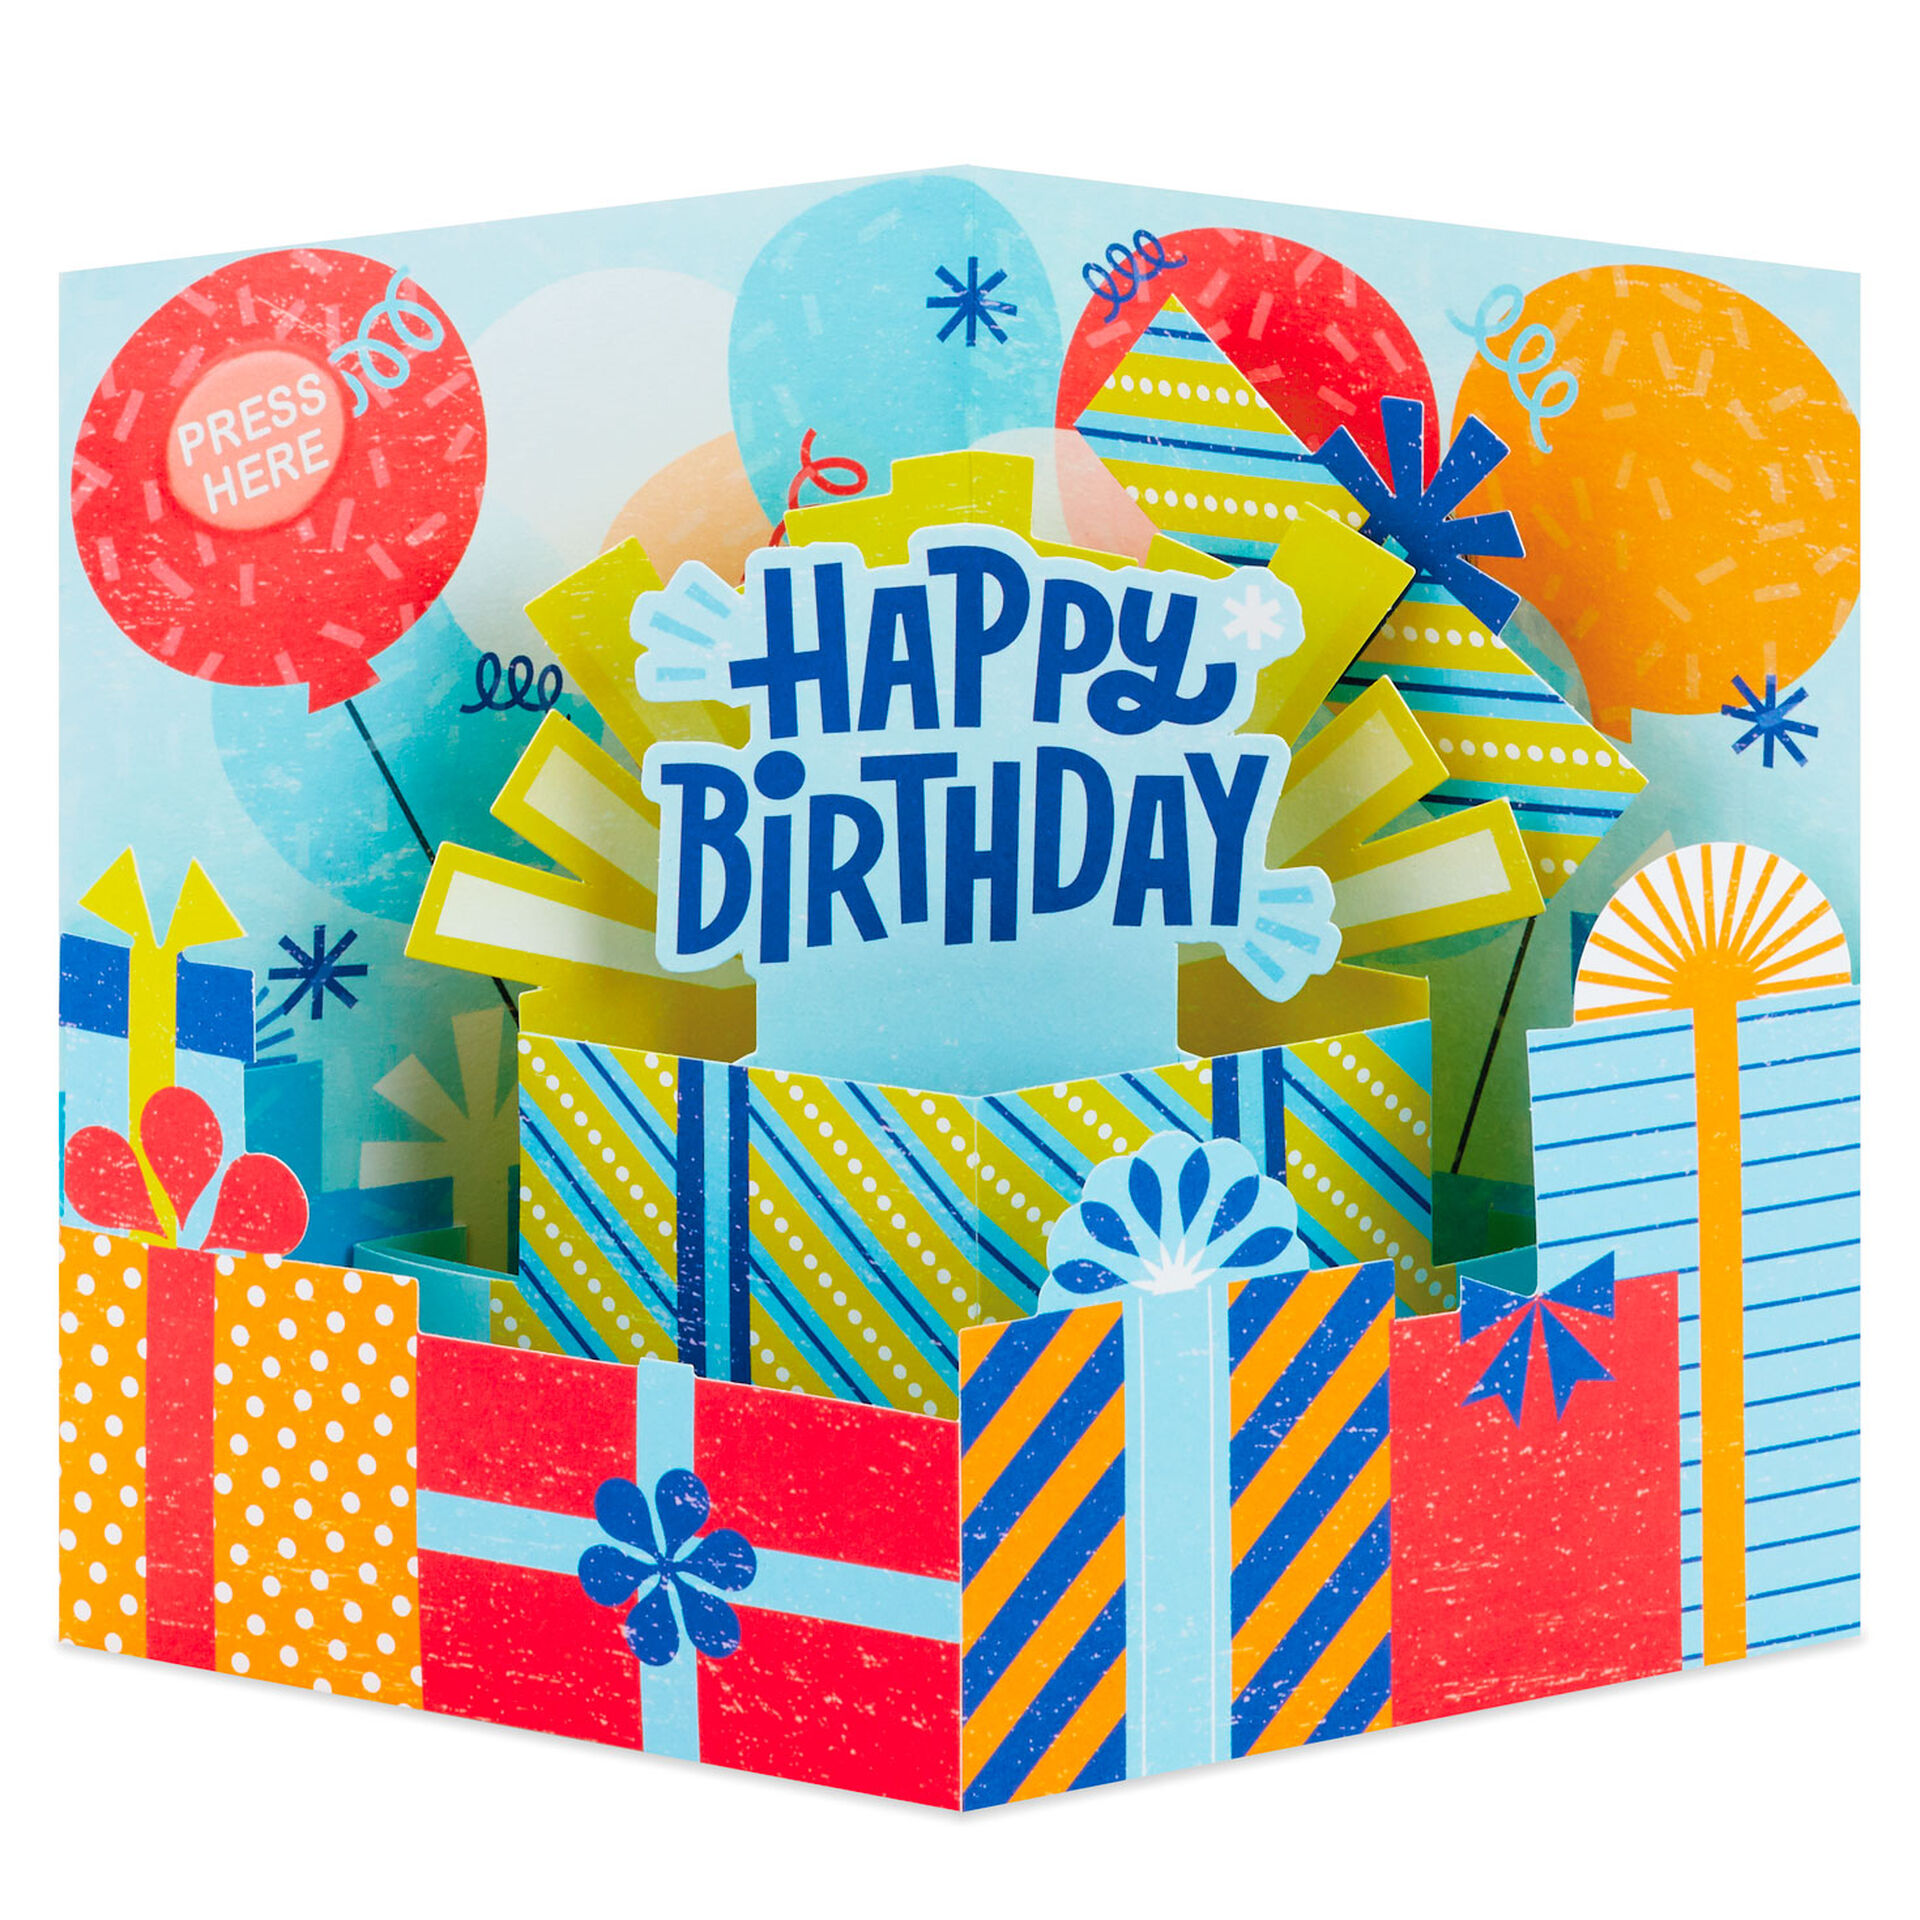 Gifts-Musical-3D-PopUp-Birthday-Card-With-Light_899ARH1494_02